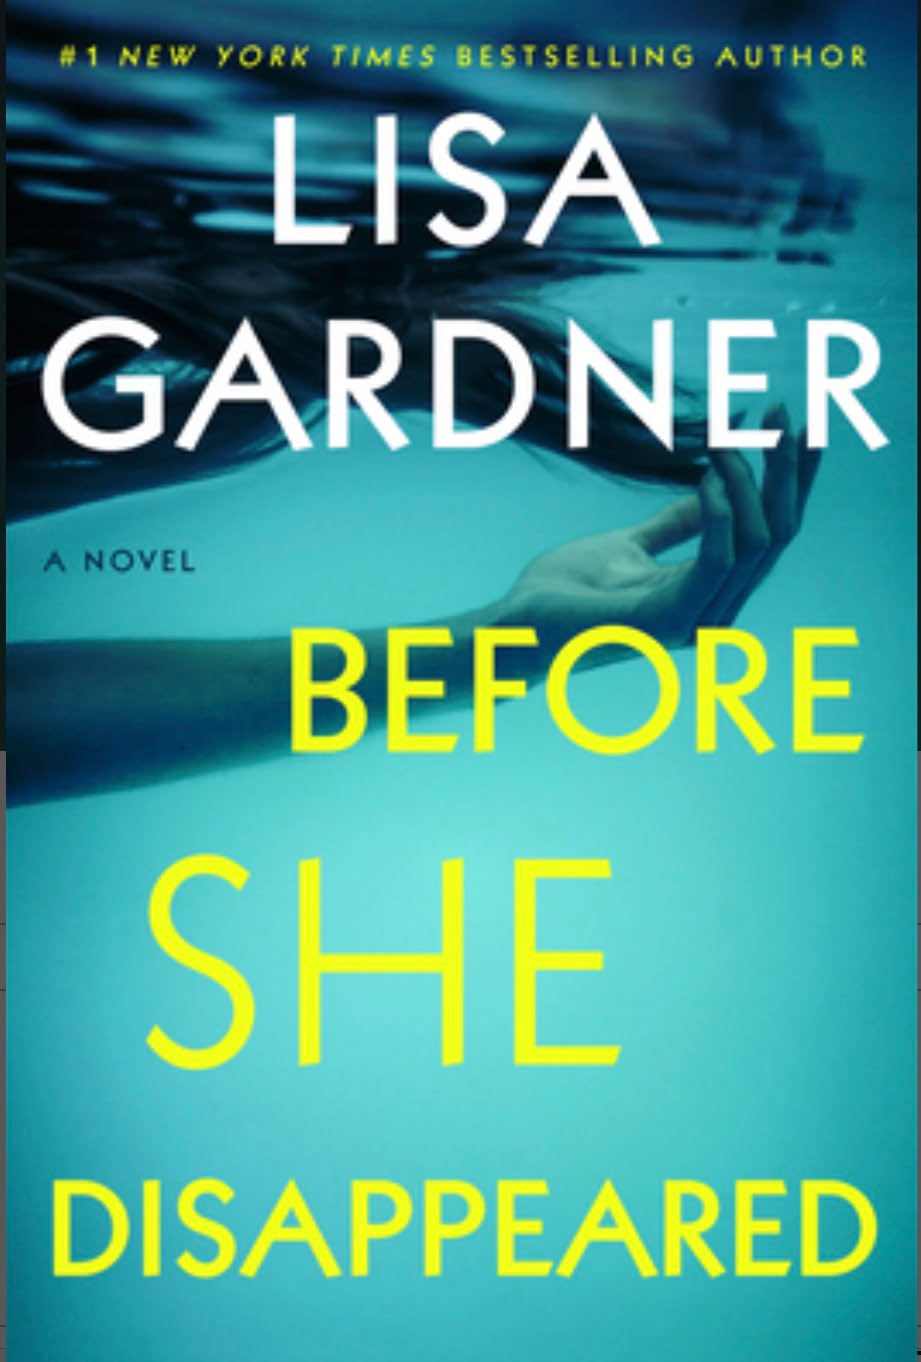 BEFORE SHE DISAPPEARED BY LISA GARDNER – BOOK REVIEW